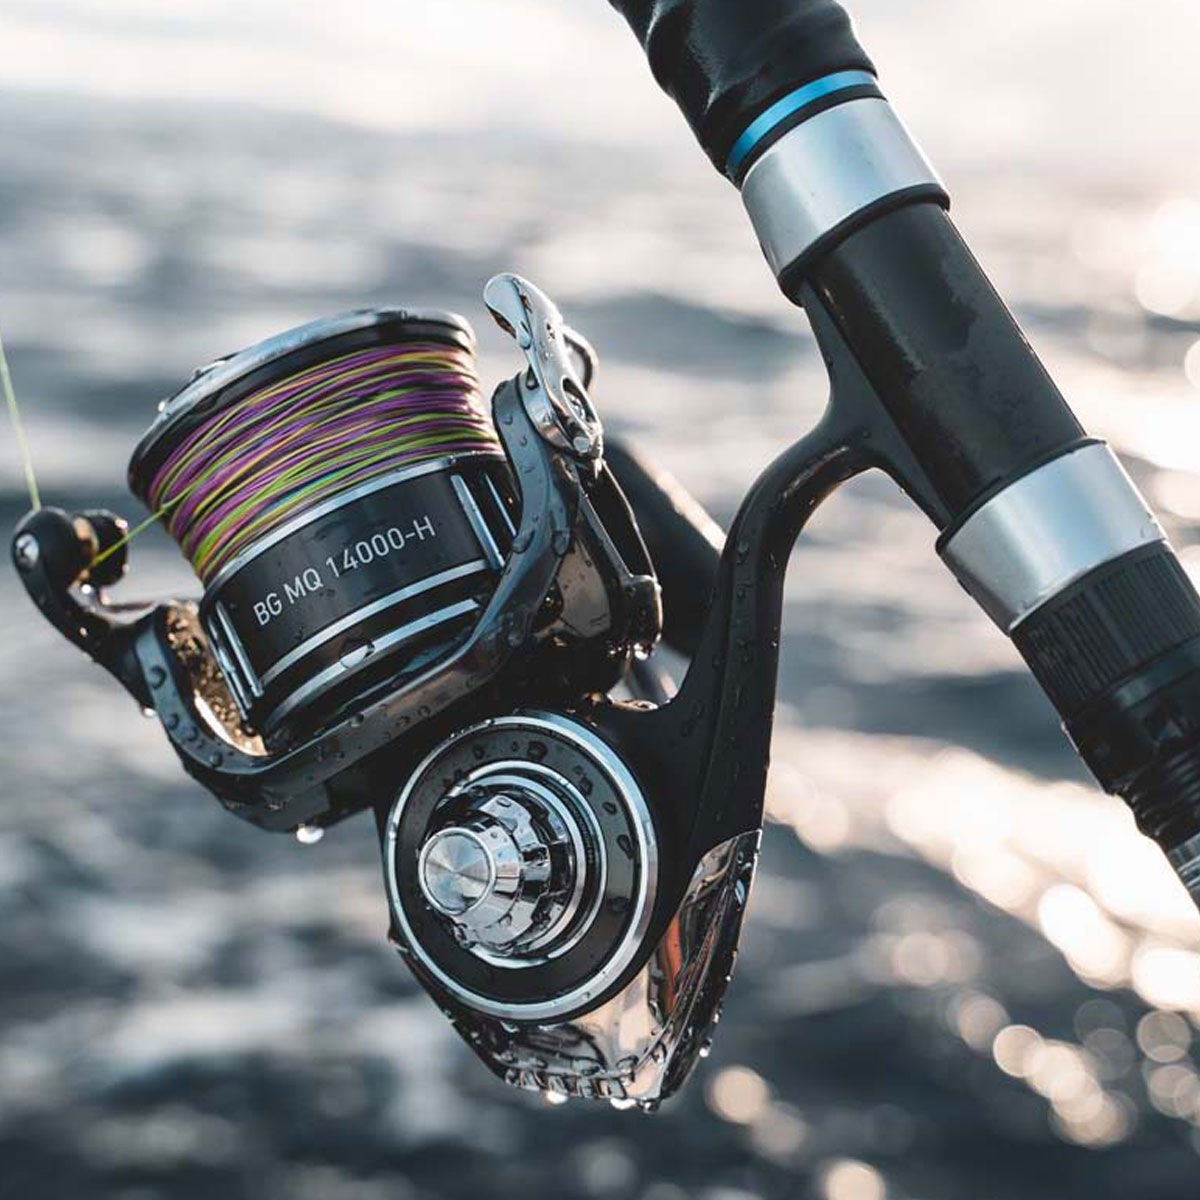 Is there anything that compares or surpasses daiwa j-braid? : r/Fishing_Gear